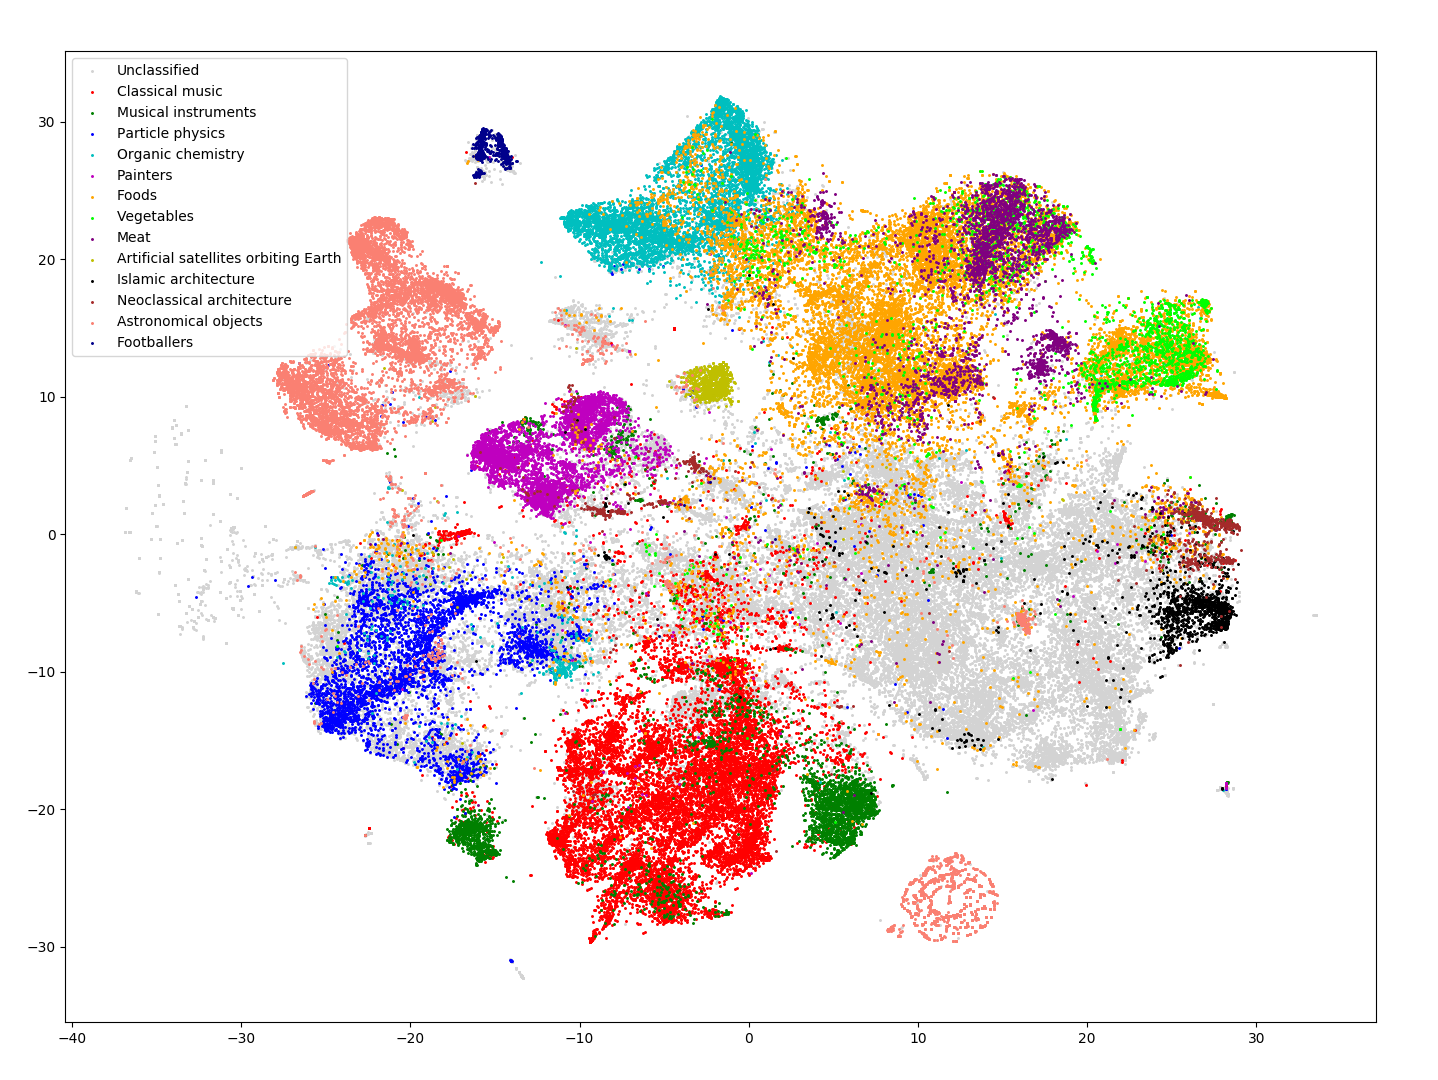 2D visualisation of 120k Wikipedia pages using PCA + t-SNE